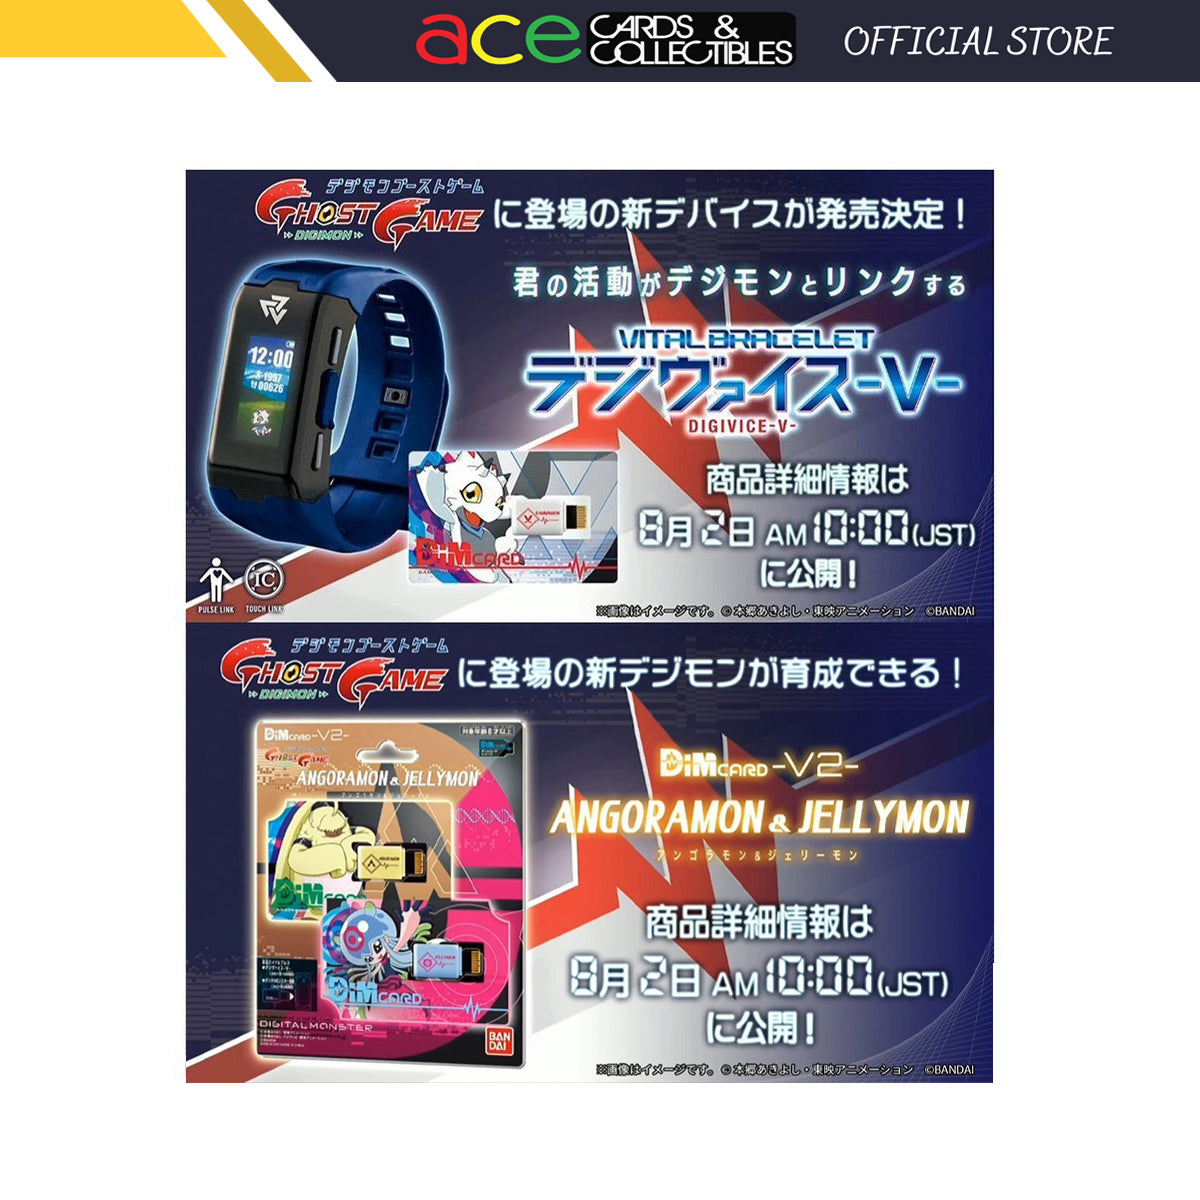 Digimon Ghost Game Digivice V [Vital Bracelet ver Blue with Gammamon / DIM Card V1 Gammamon / Angoramon & Jellymon]-Vital Bracelet ver. Blue-Bandai-Ace Cards & Collectibles